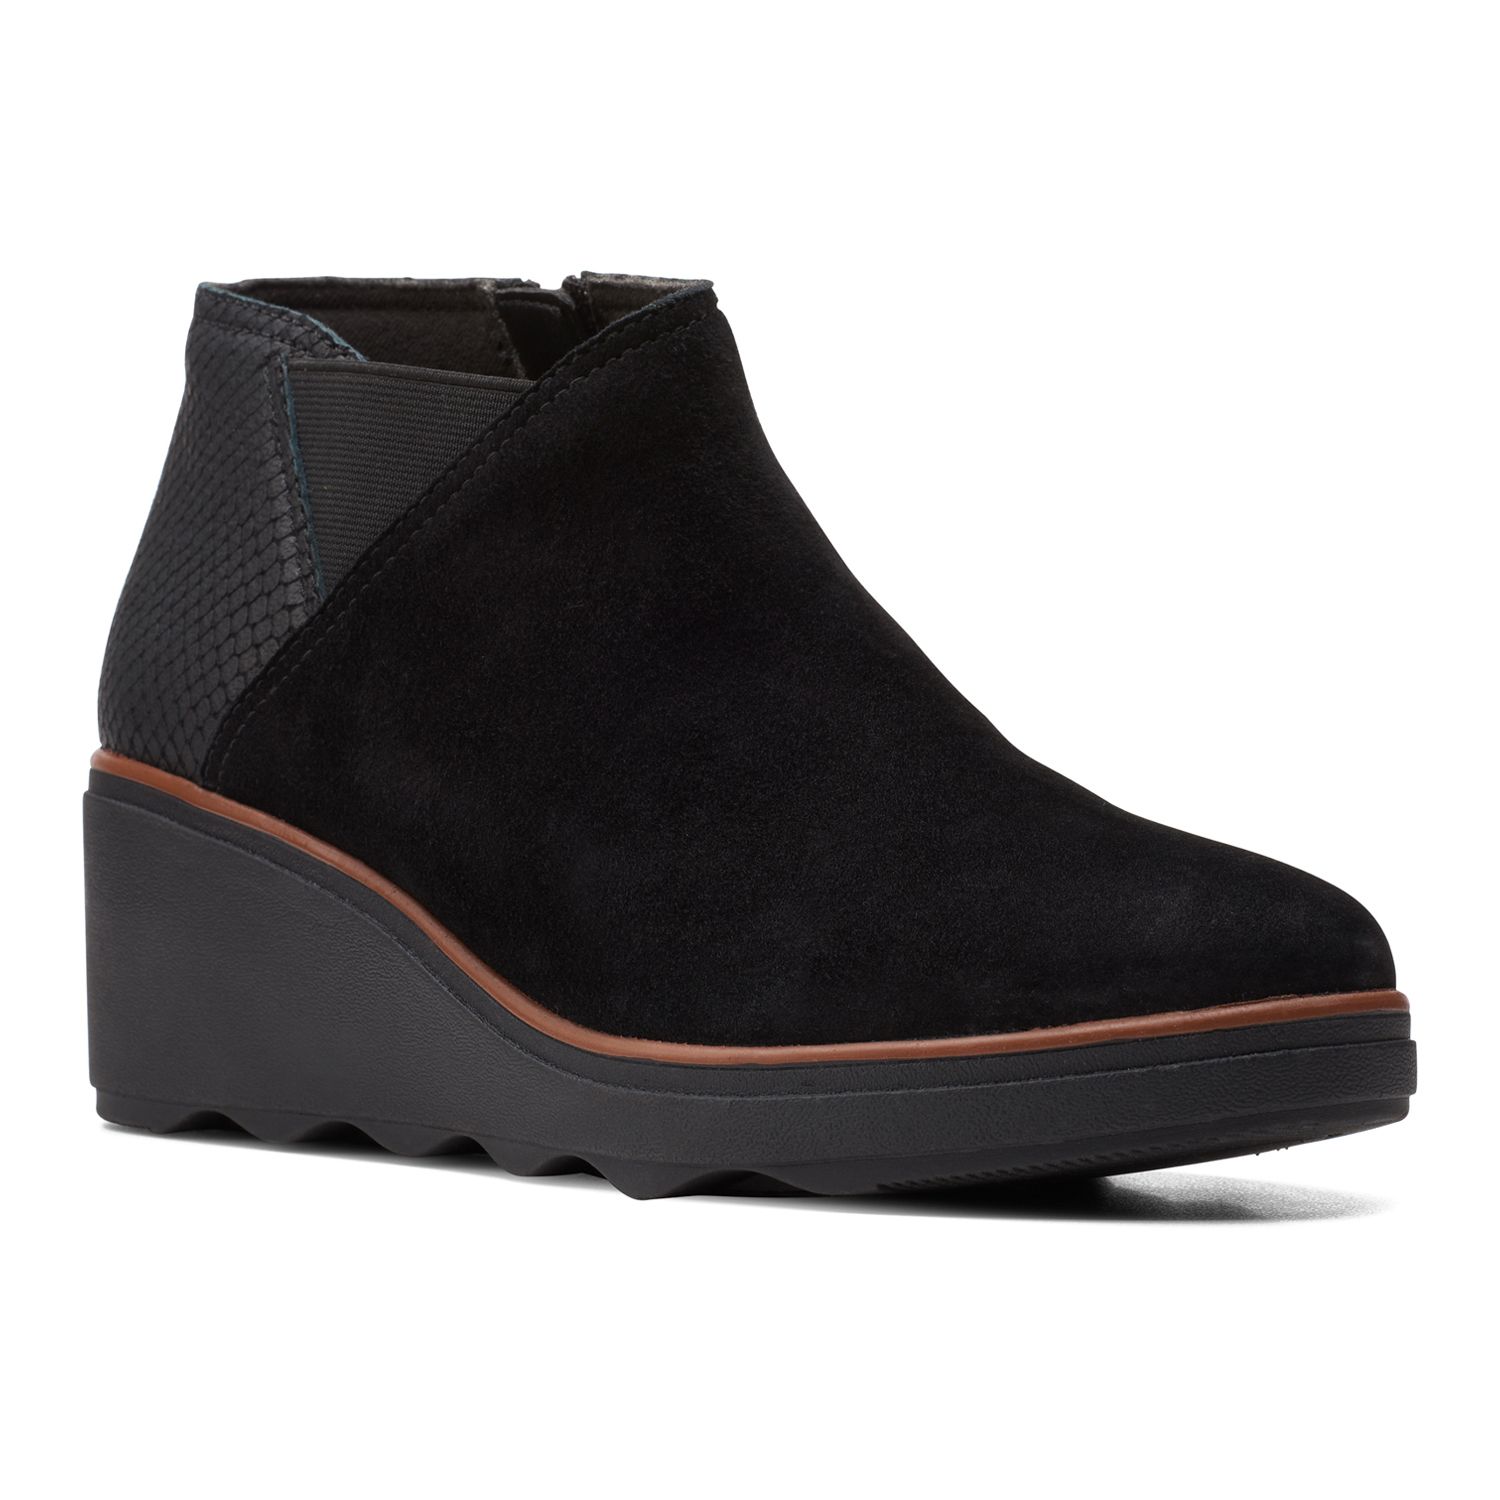 clarks wedge ankle boots